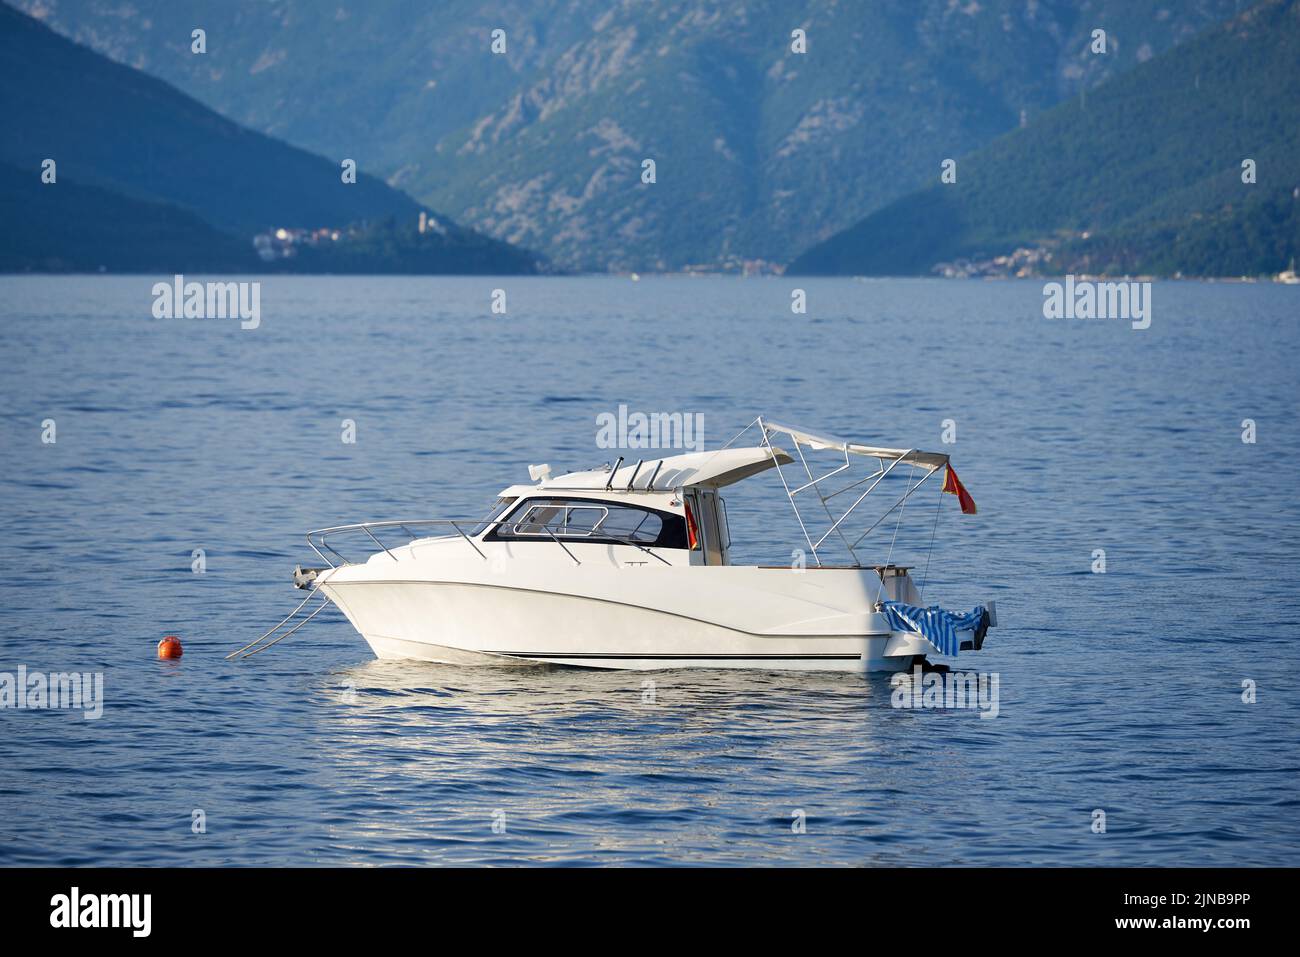 Small yacht with tent roof is moored in sea. Stock Photo